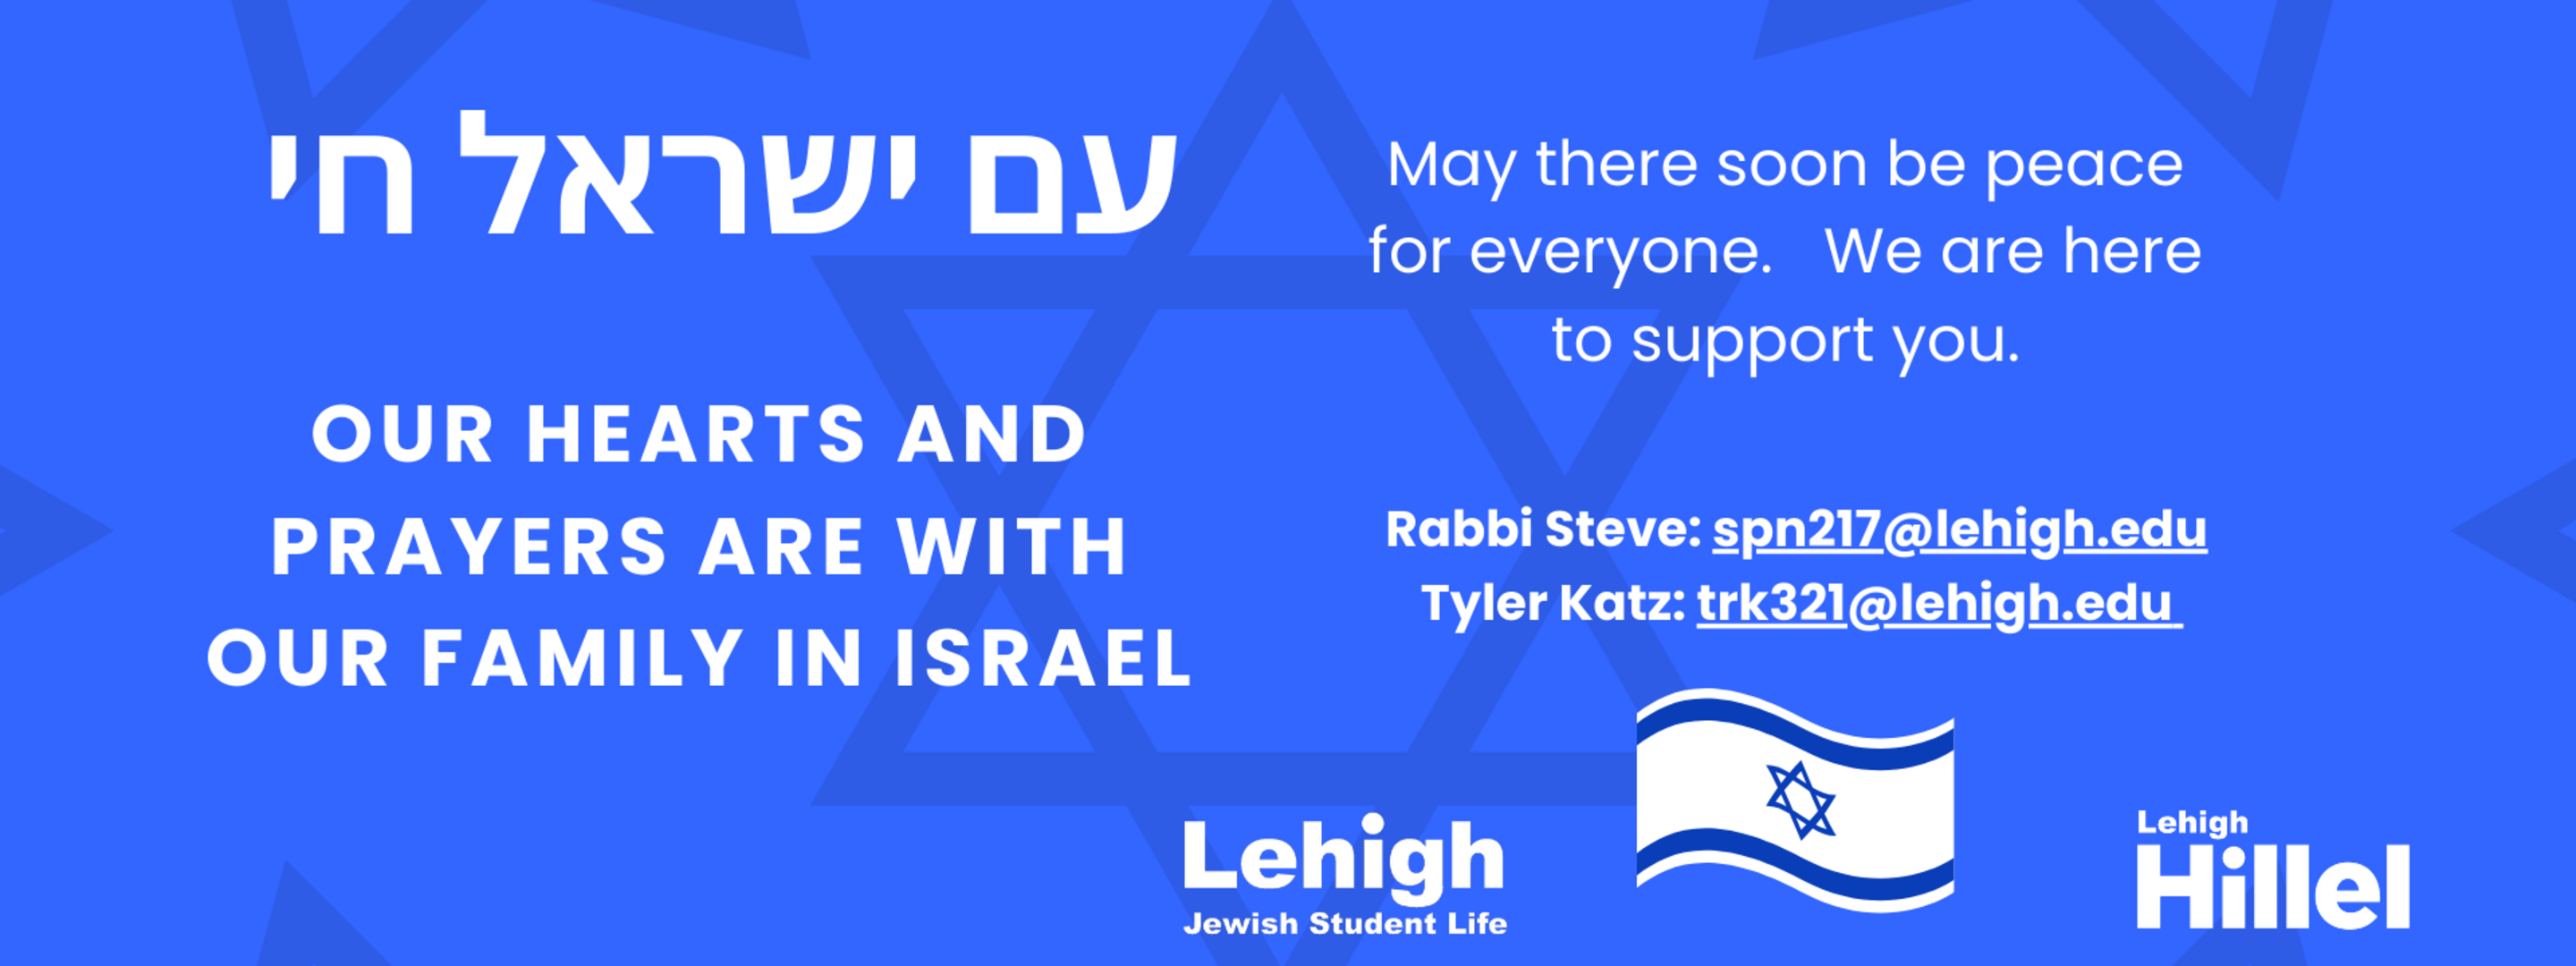 Our hearts and prayers are with Israel